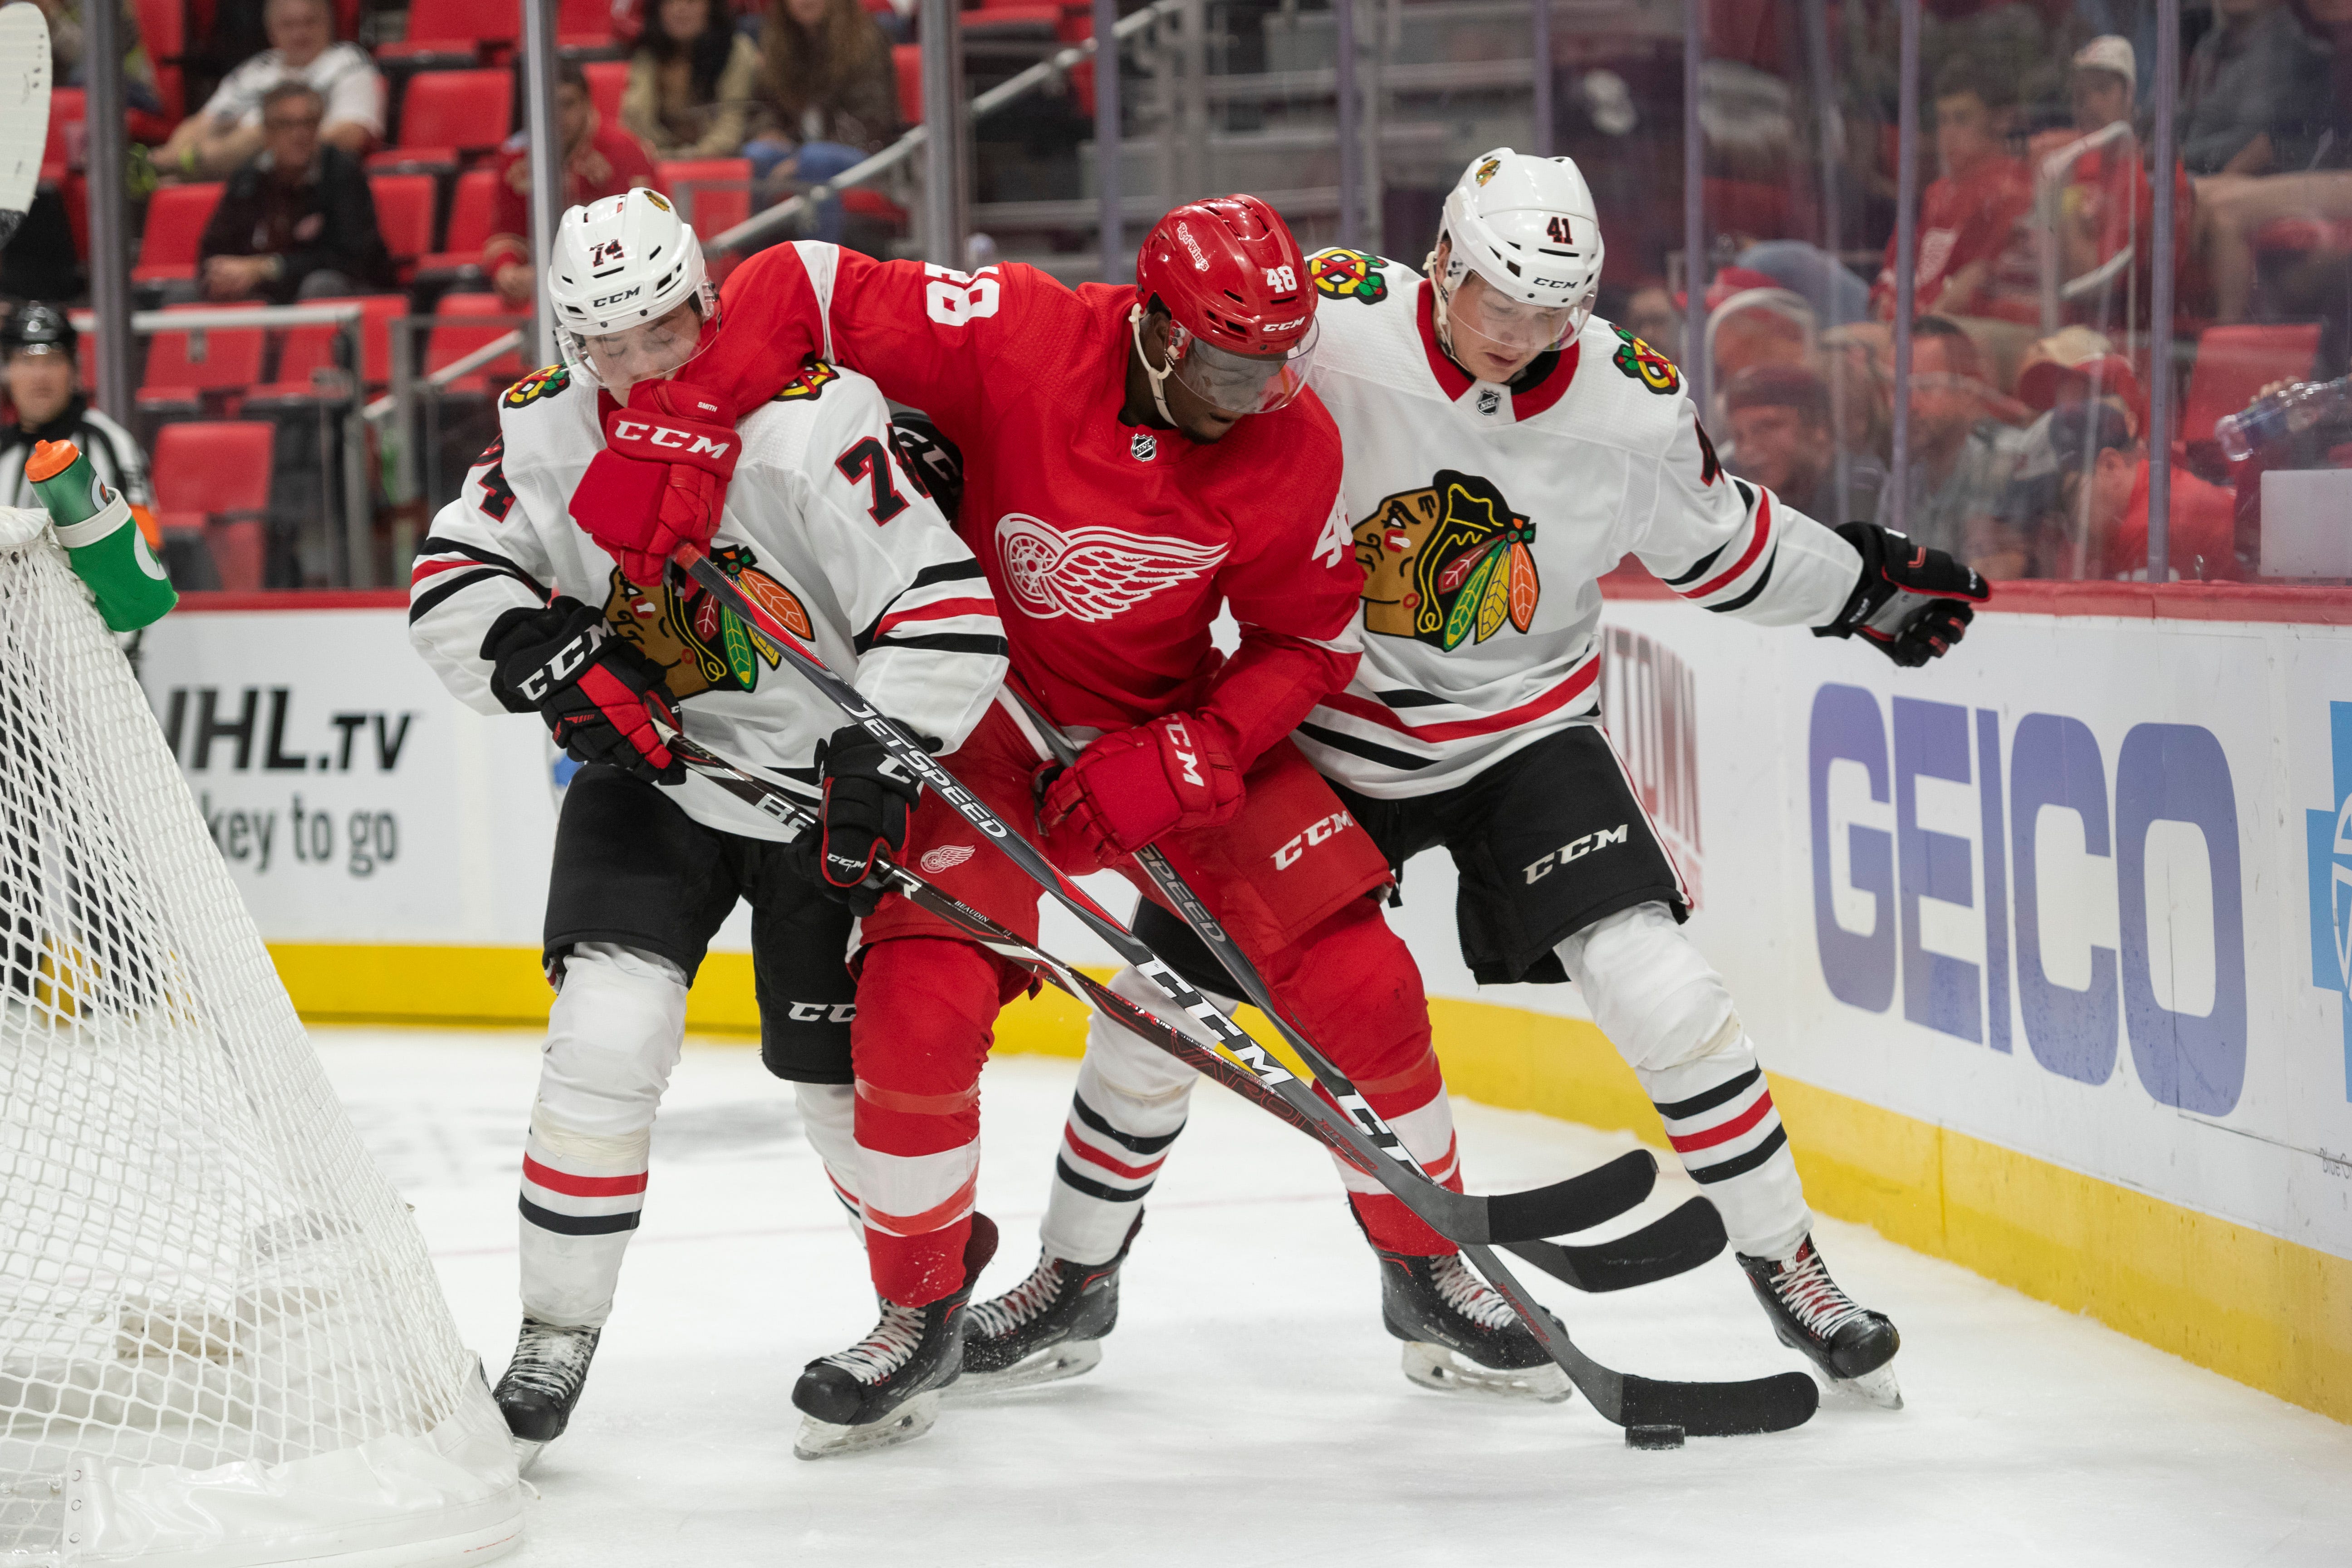 Detroit right wing Givani Smith battles for the puck with Chicago defenseman Nicolas Beaudin, left, and defenseman Joni Tuulola in the third period.